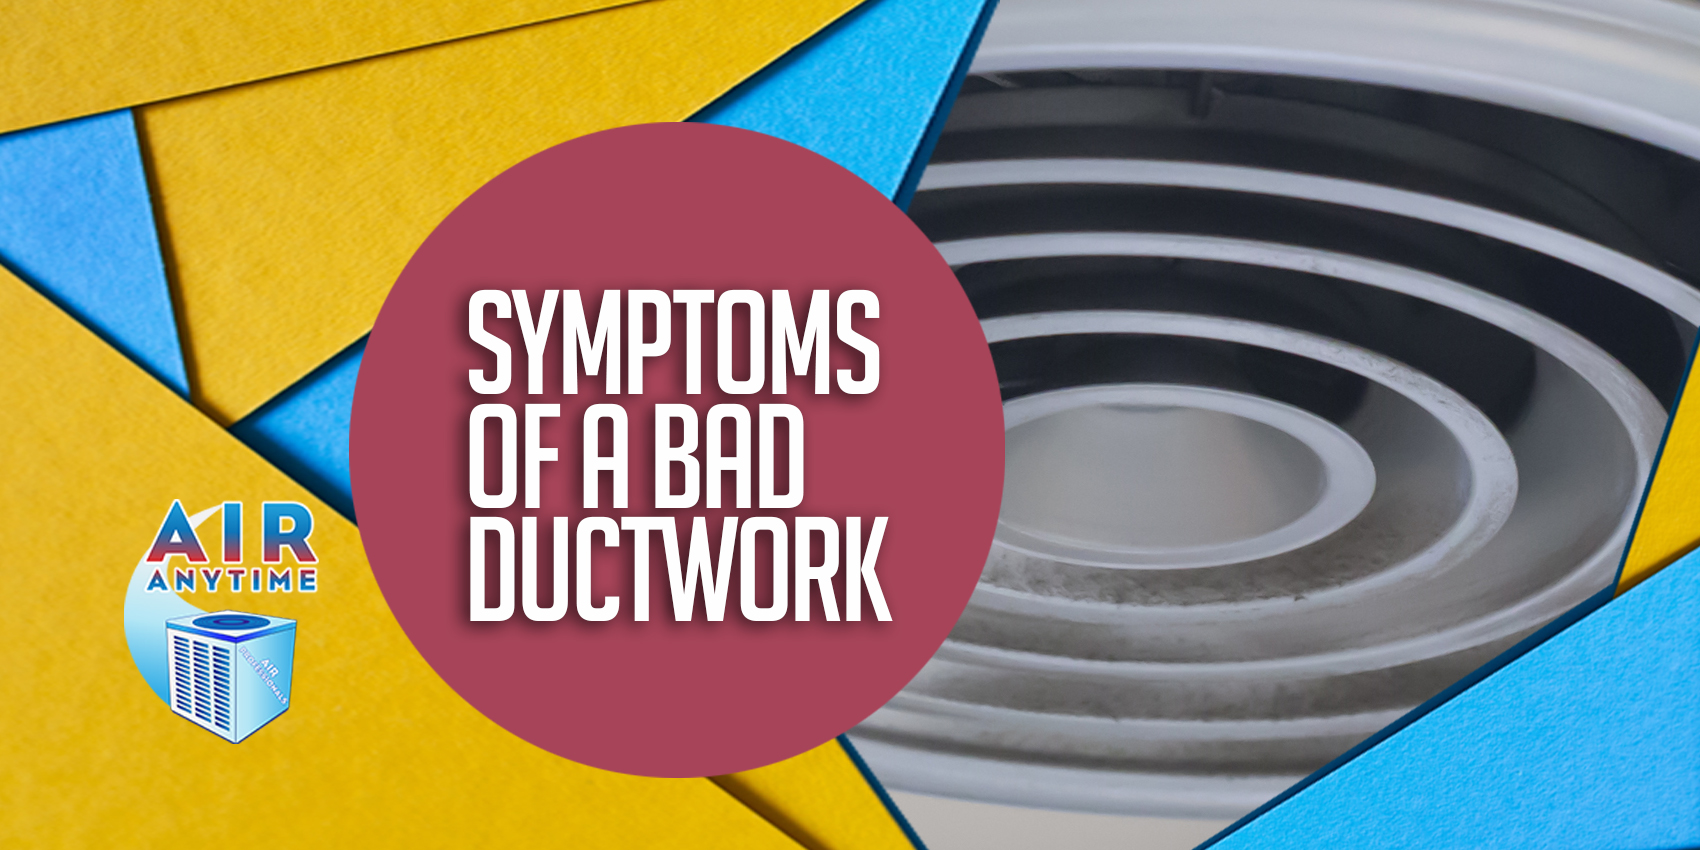 Symptoms Of A Bad Ductwork